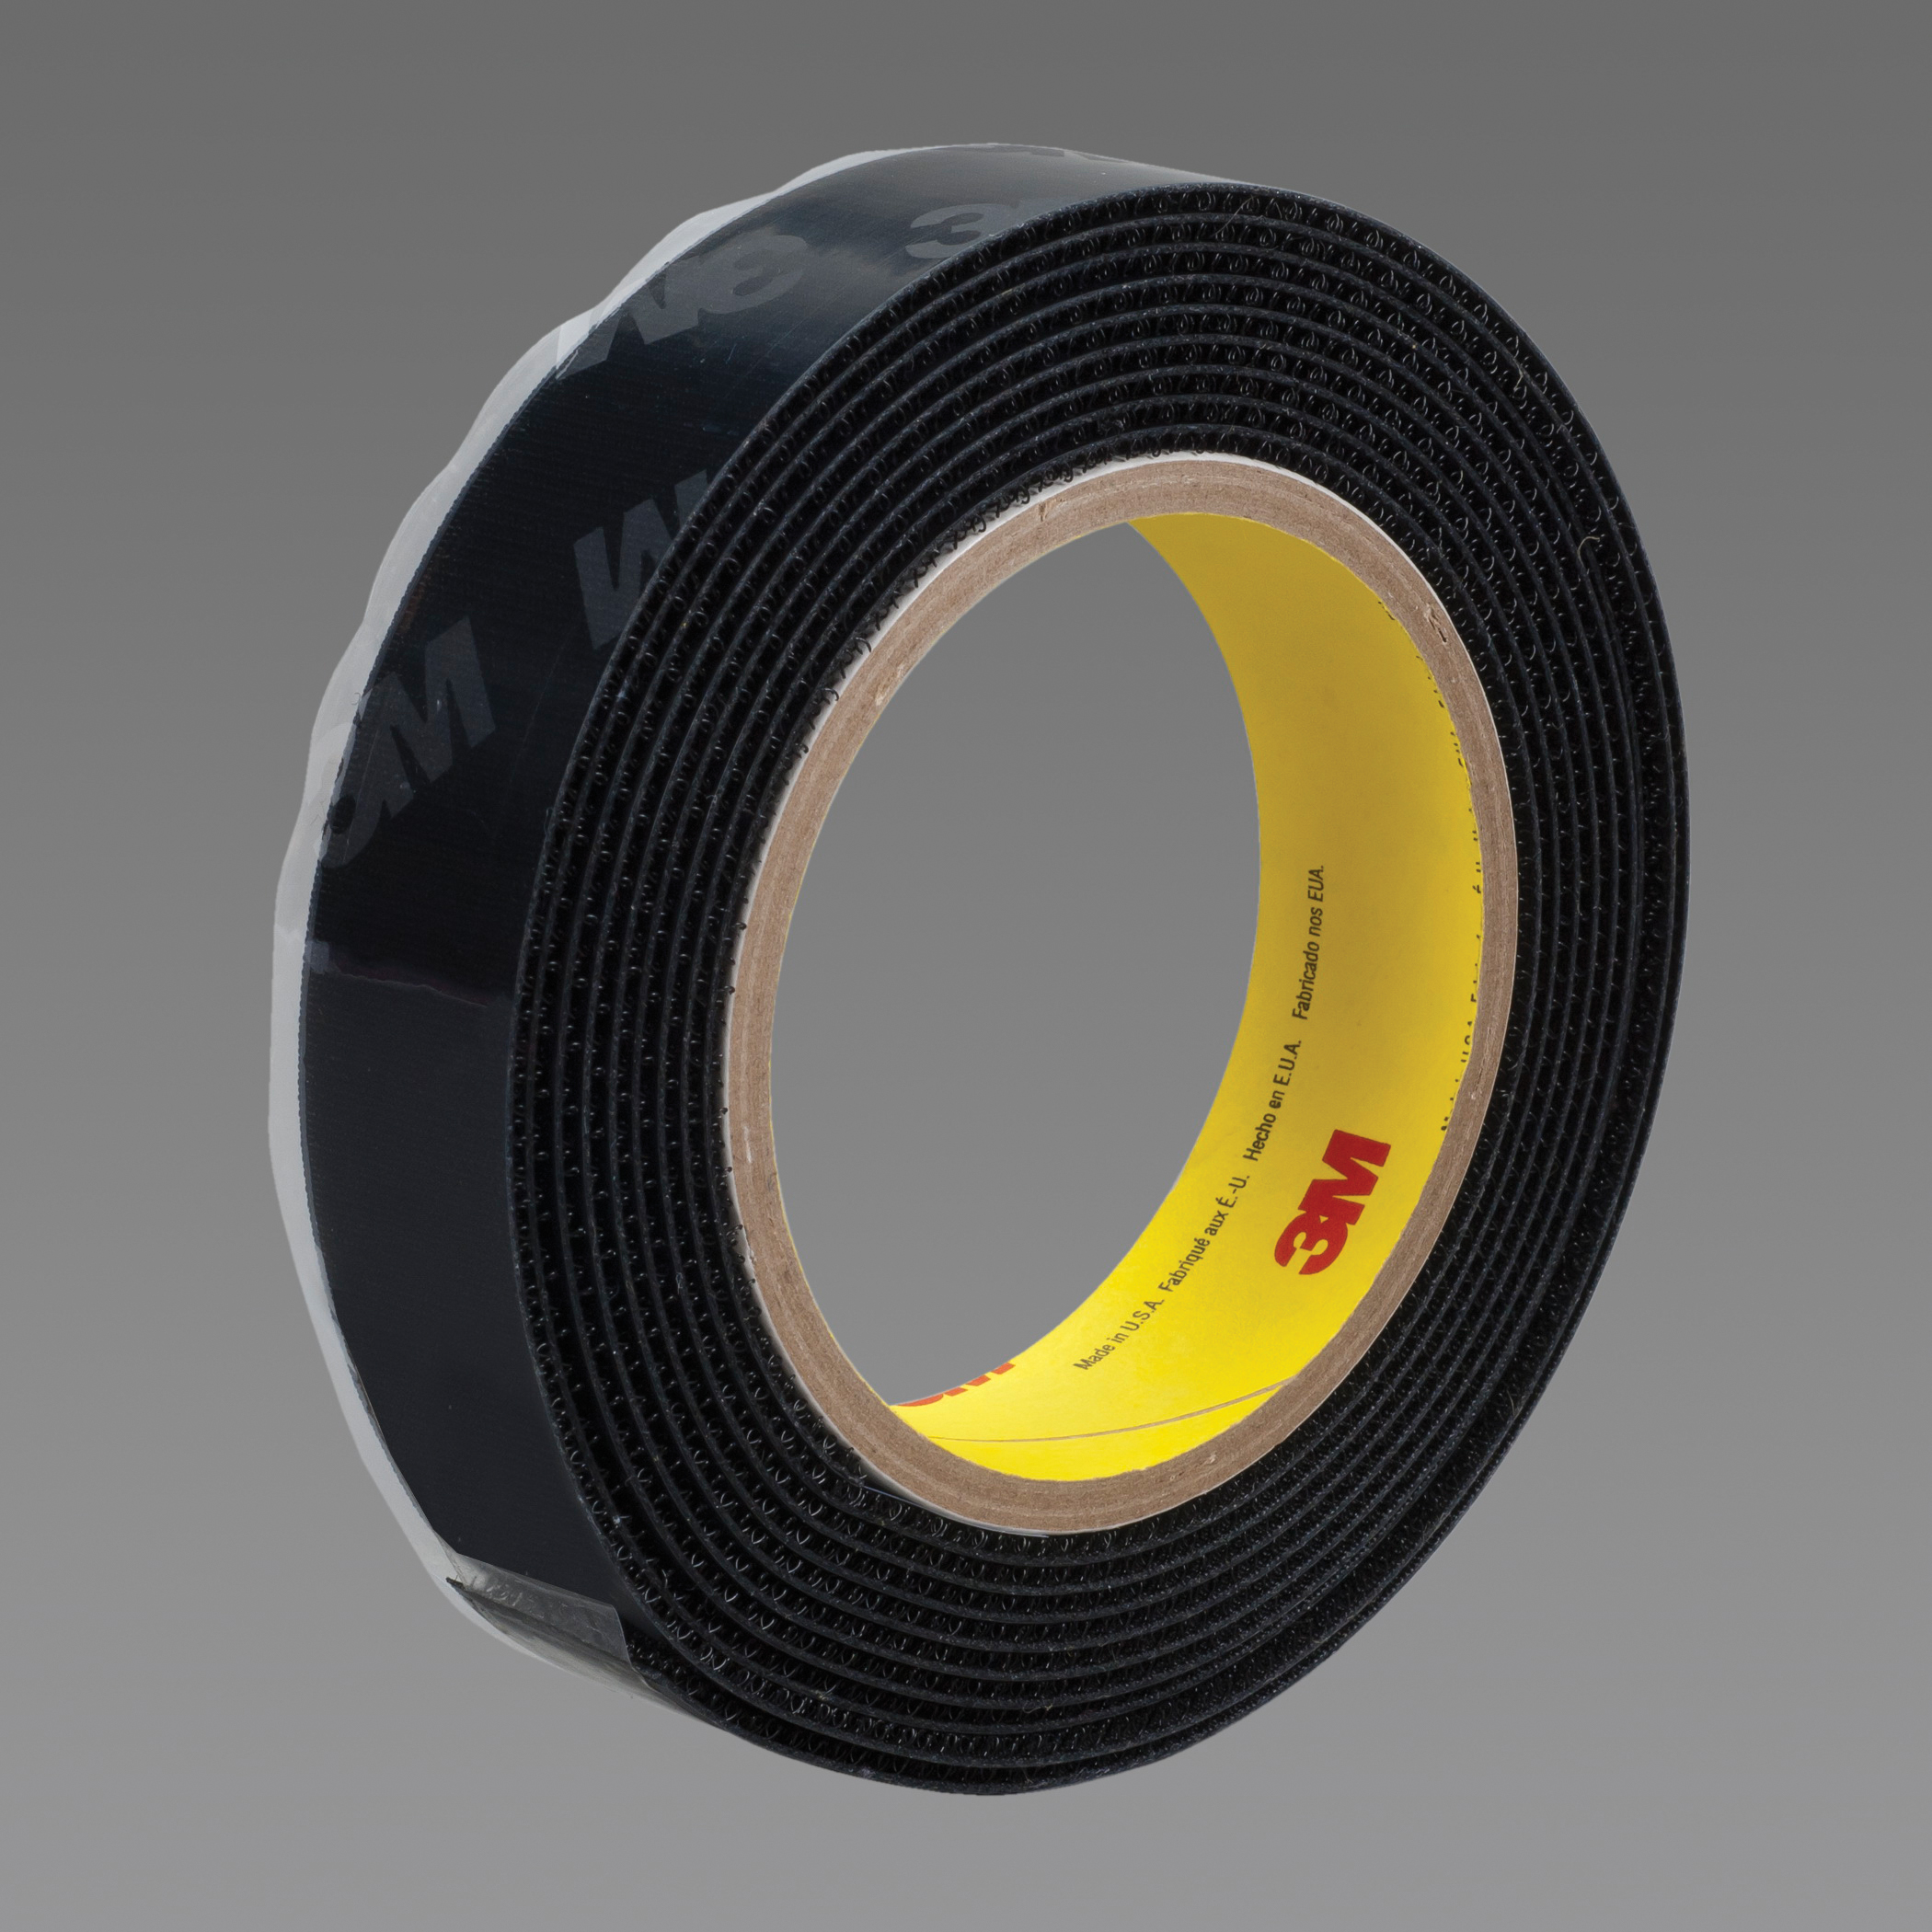 3M™ 021200-40663 Reclosable Loop Fastener Tape, 25 yd L x 1 in W, 0.15 in THK Engaged, Synthetic Rubber Adhesive, Woven Nylon Backing, Black